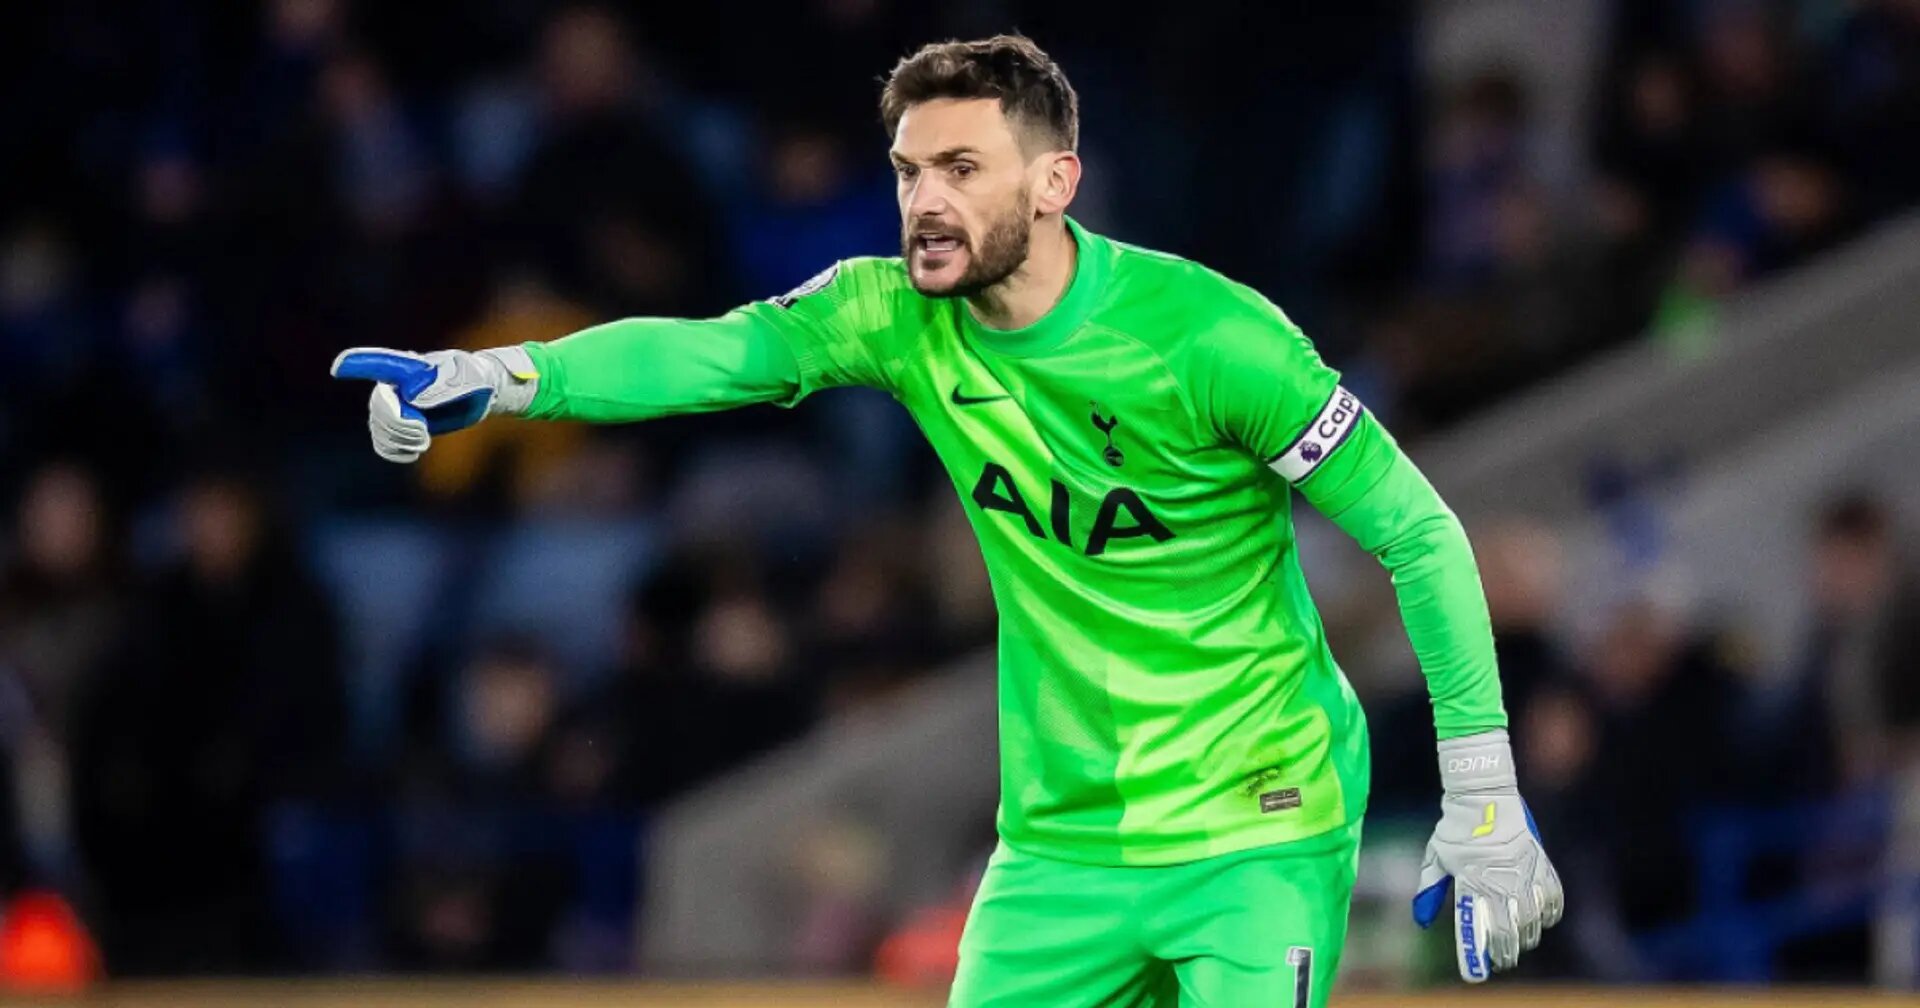 Joining Roma Could Have Been a Good Choice for Lloris